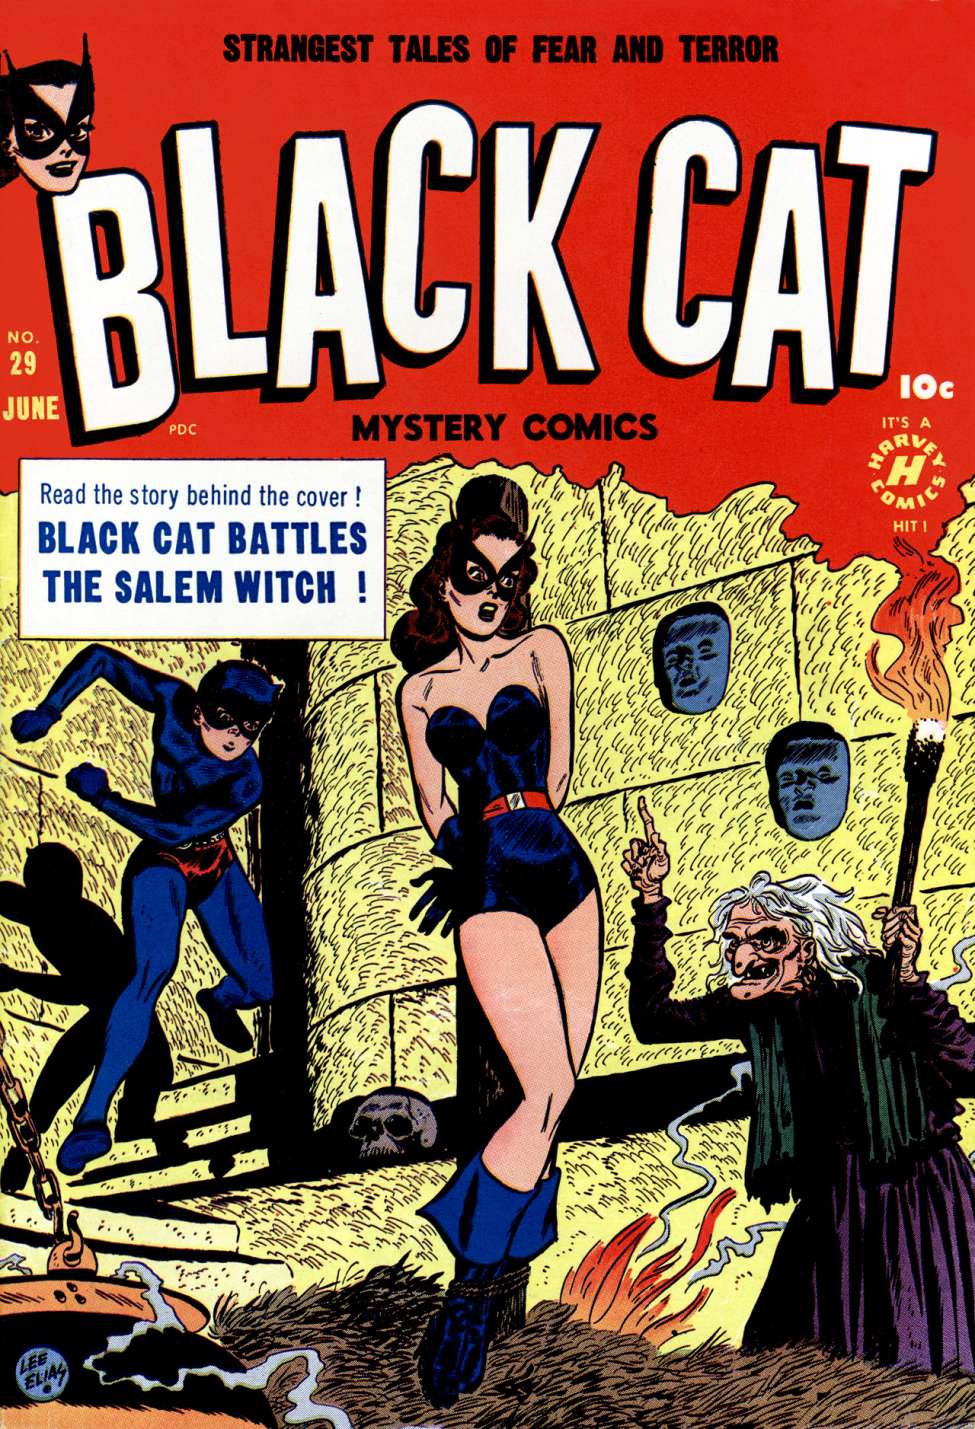 Comic Book Cover For Black Cat 29 (Mystery)